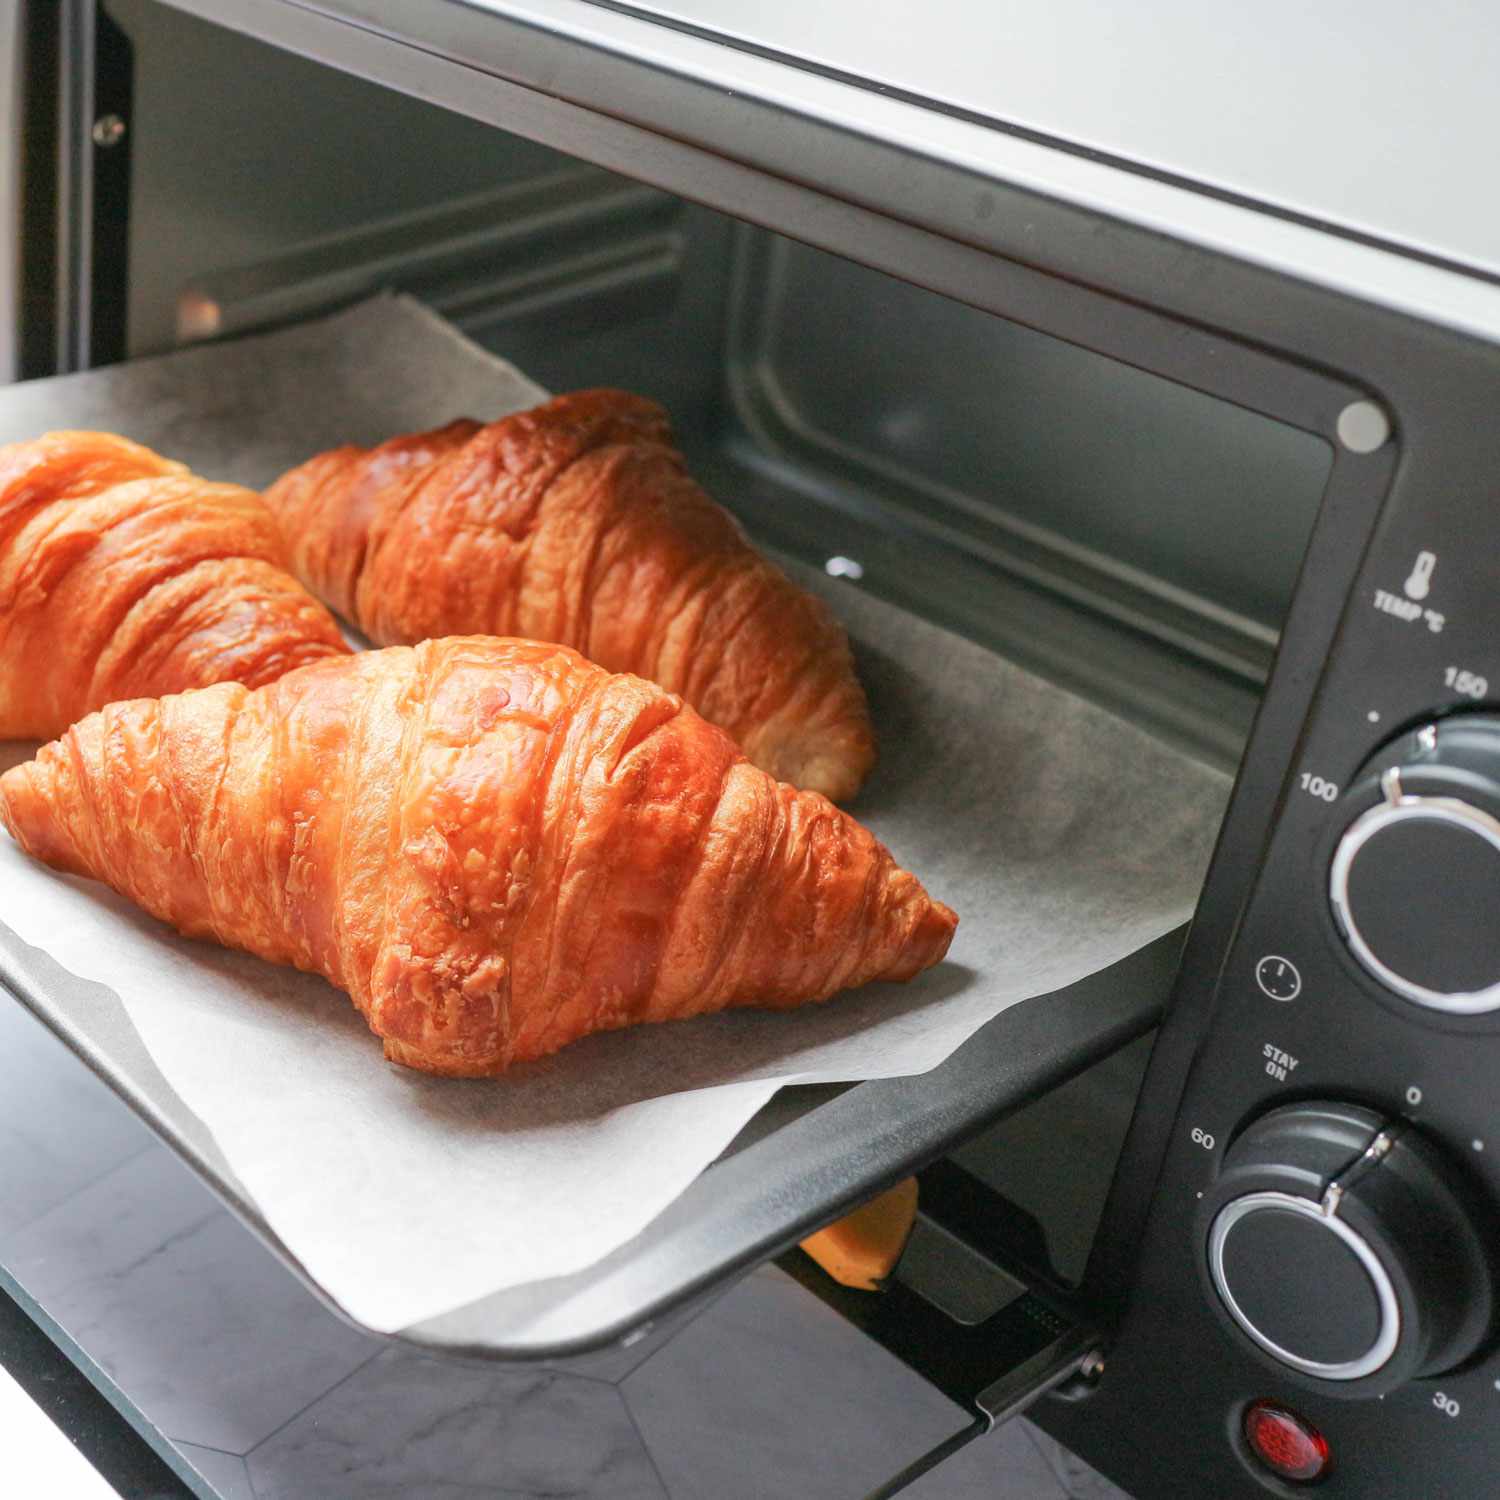 How to Clean Convection Oven